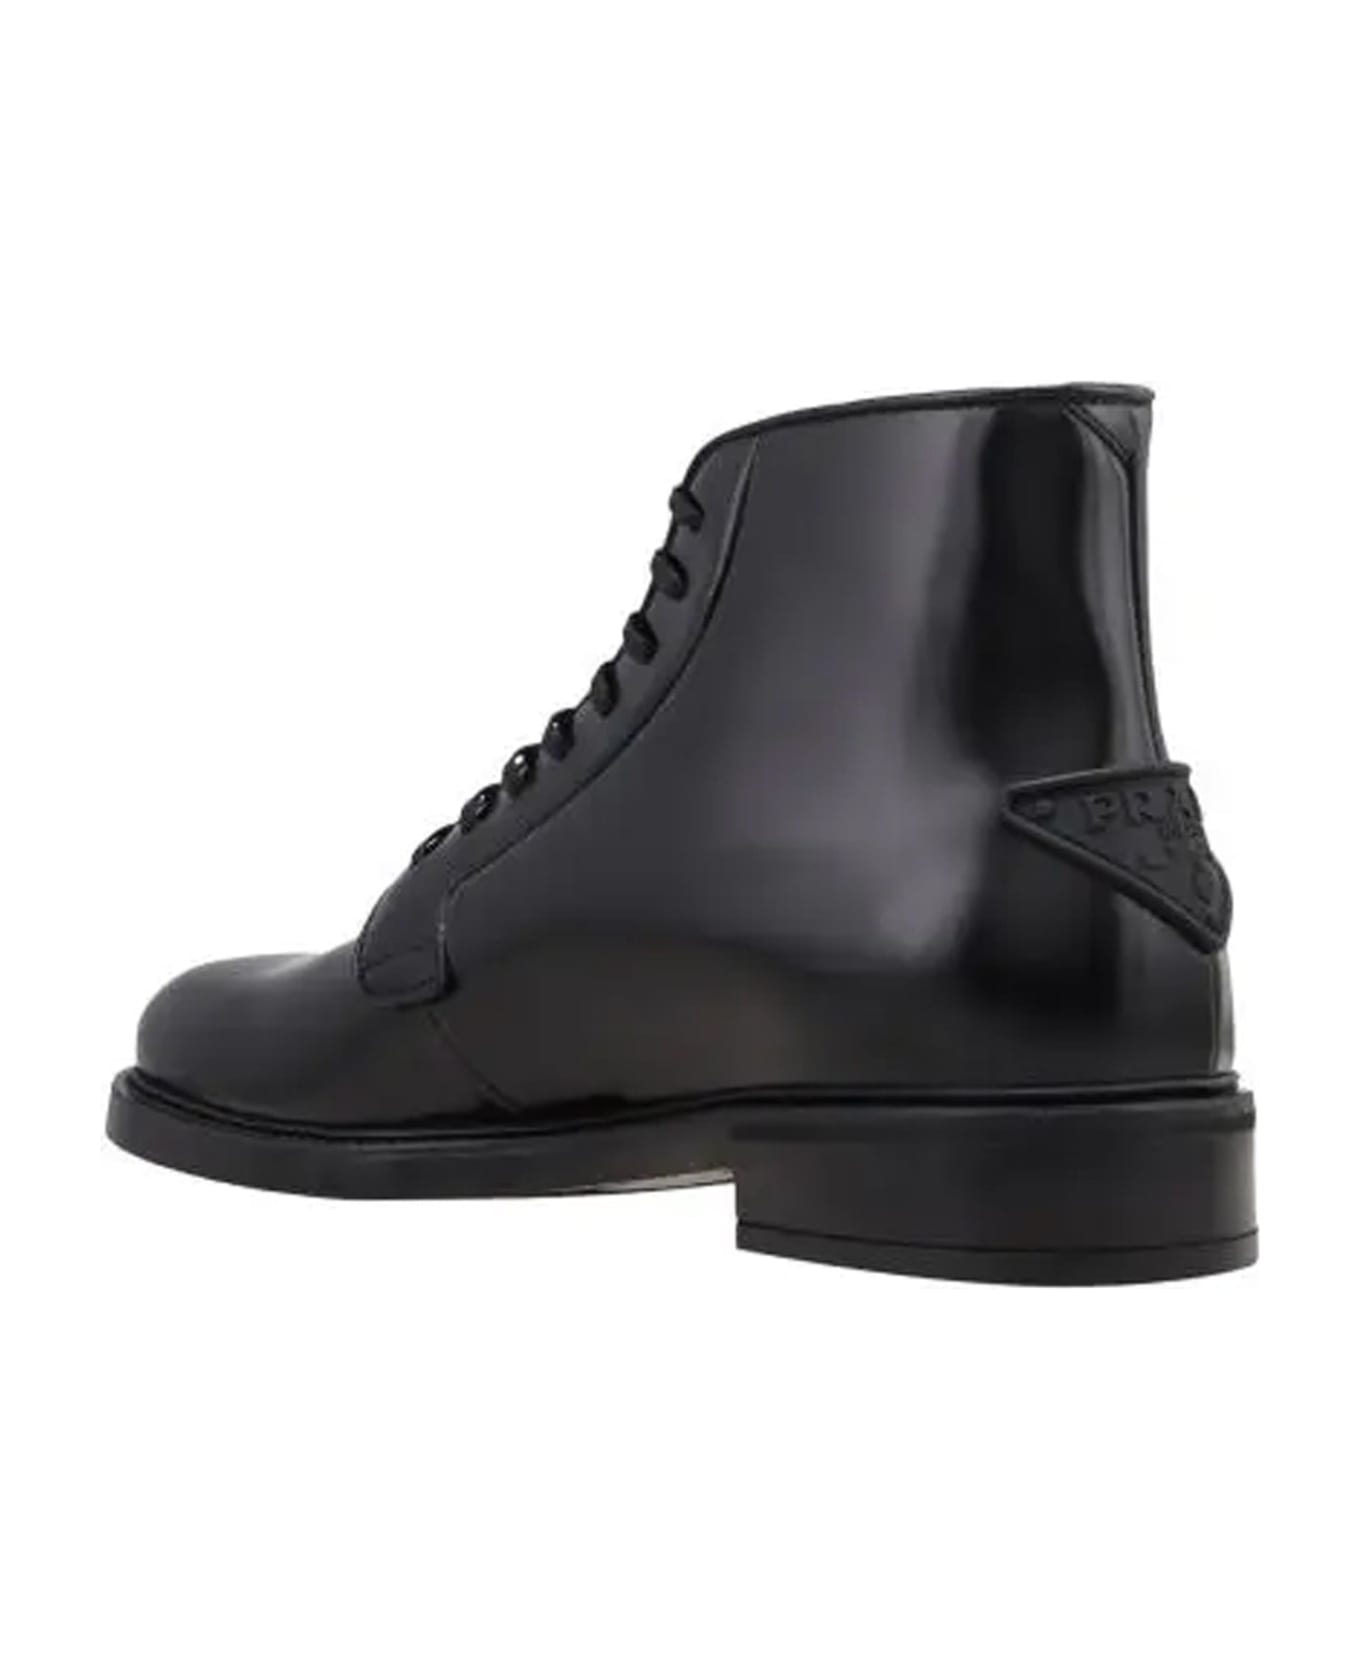 Prada Leather Lace-up Boots - Black